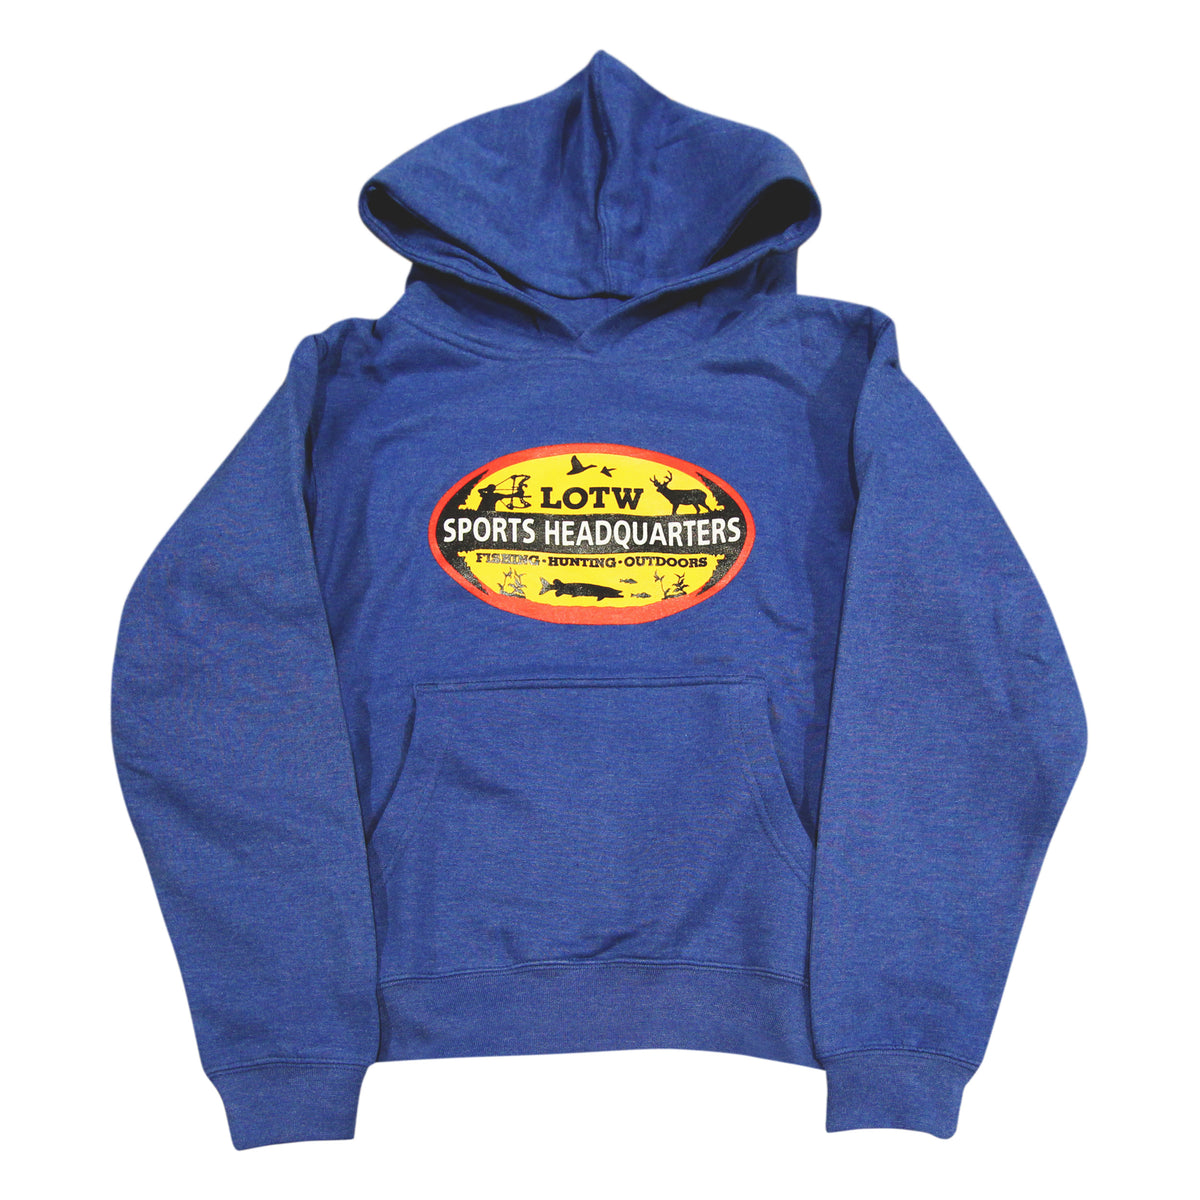 LOTW Sports Headquarters Youth Hoodie - Royal Heather